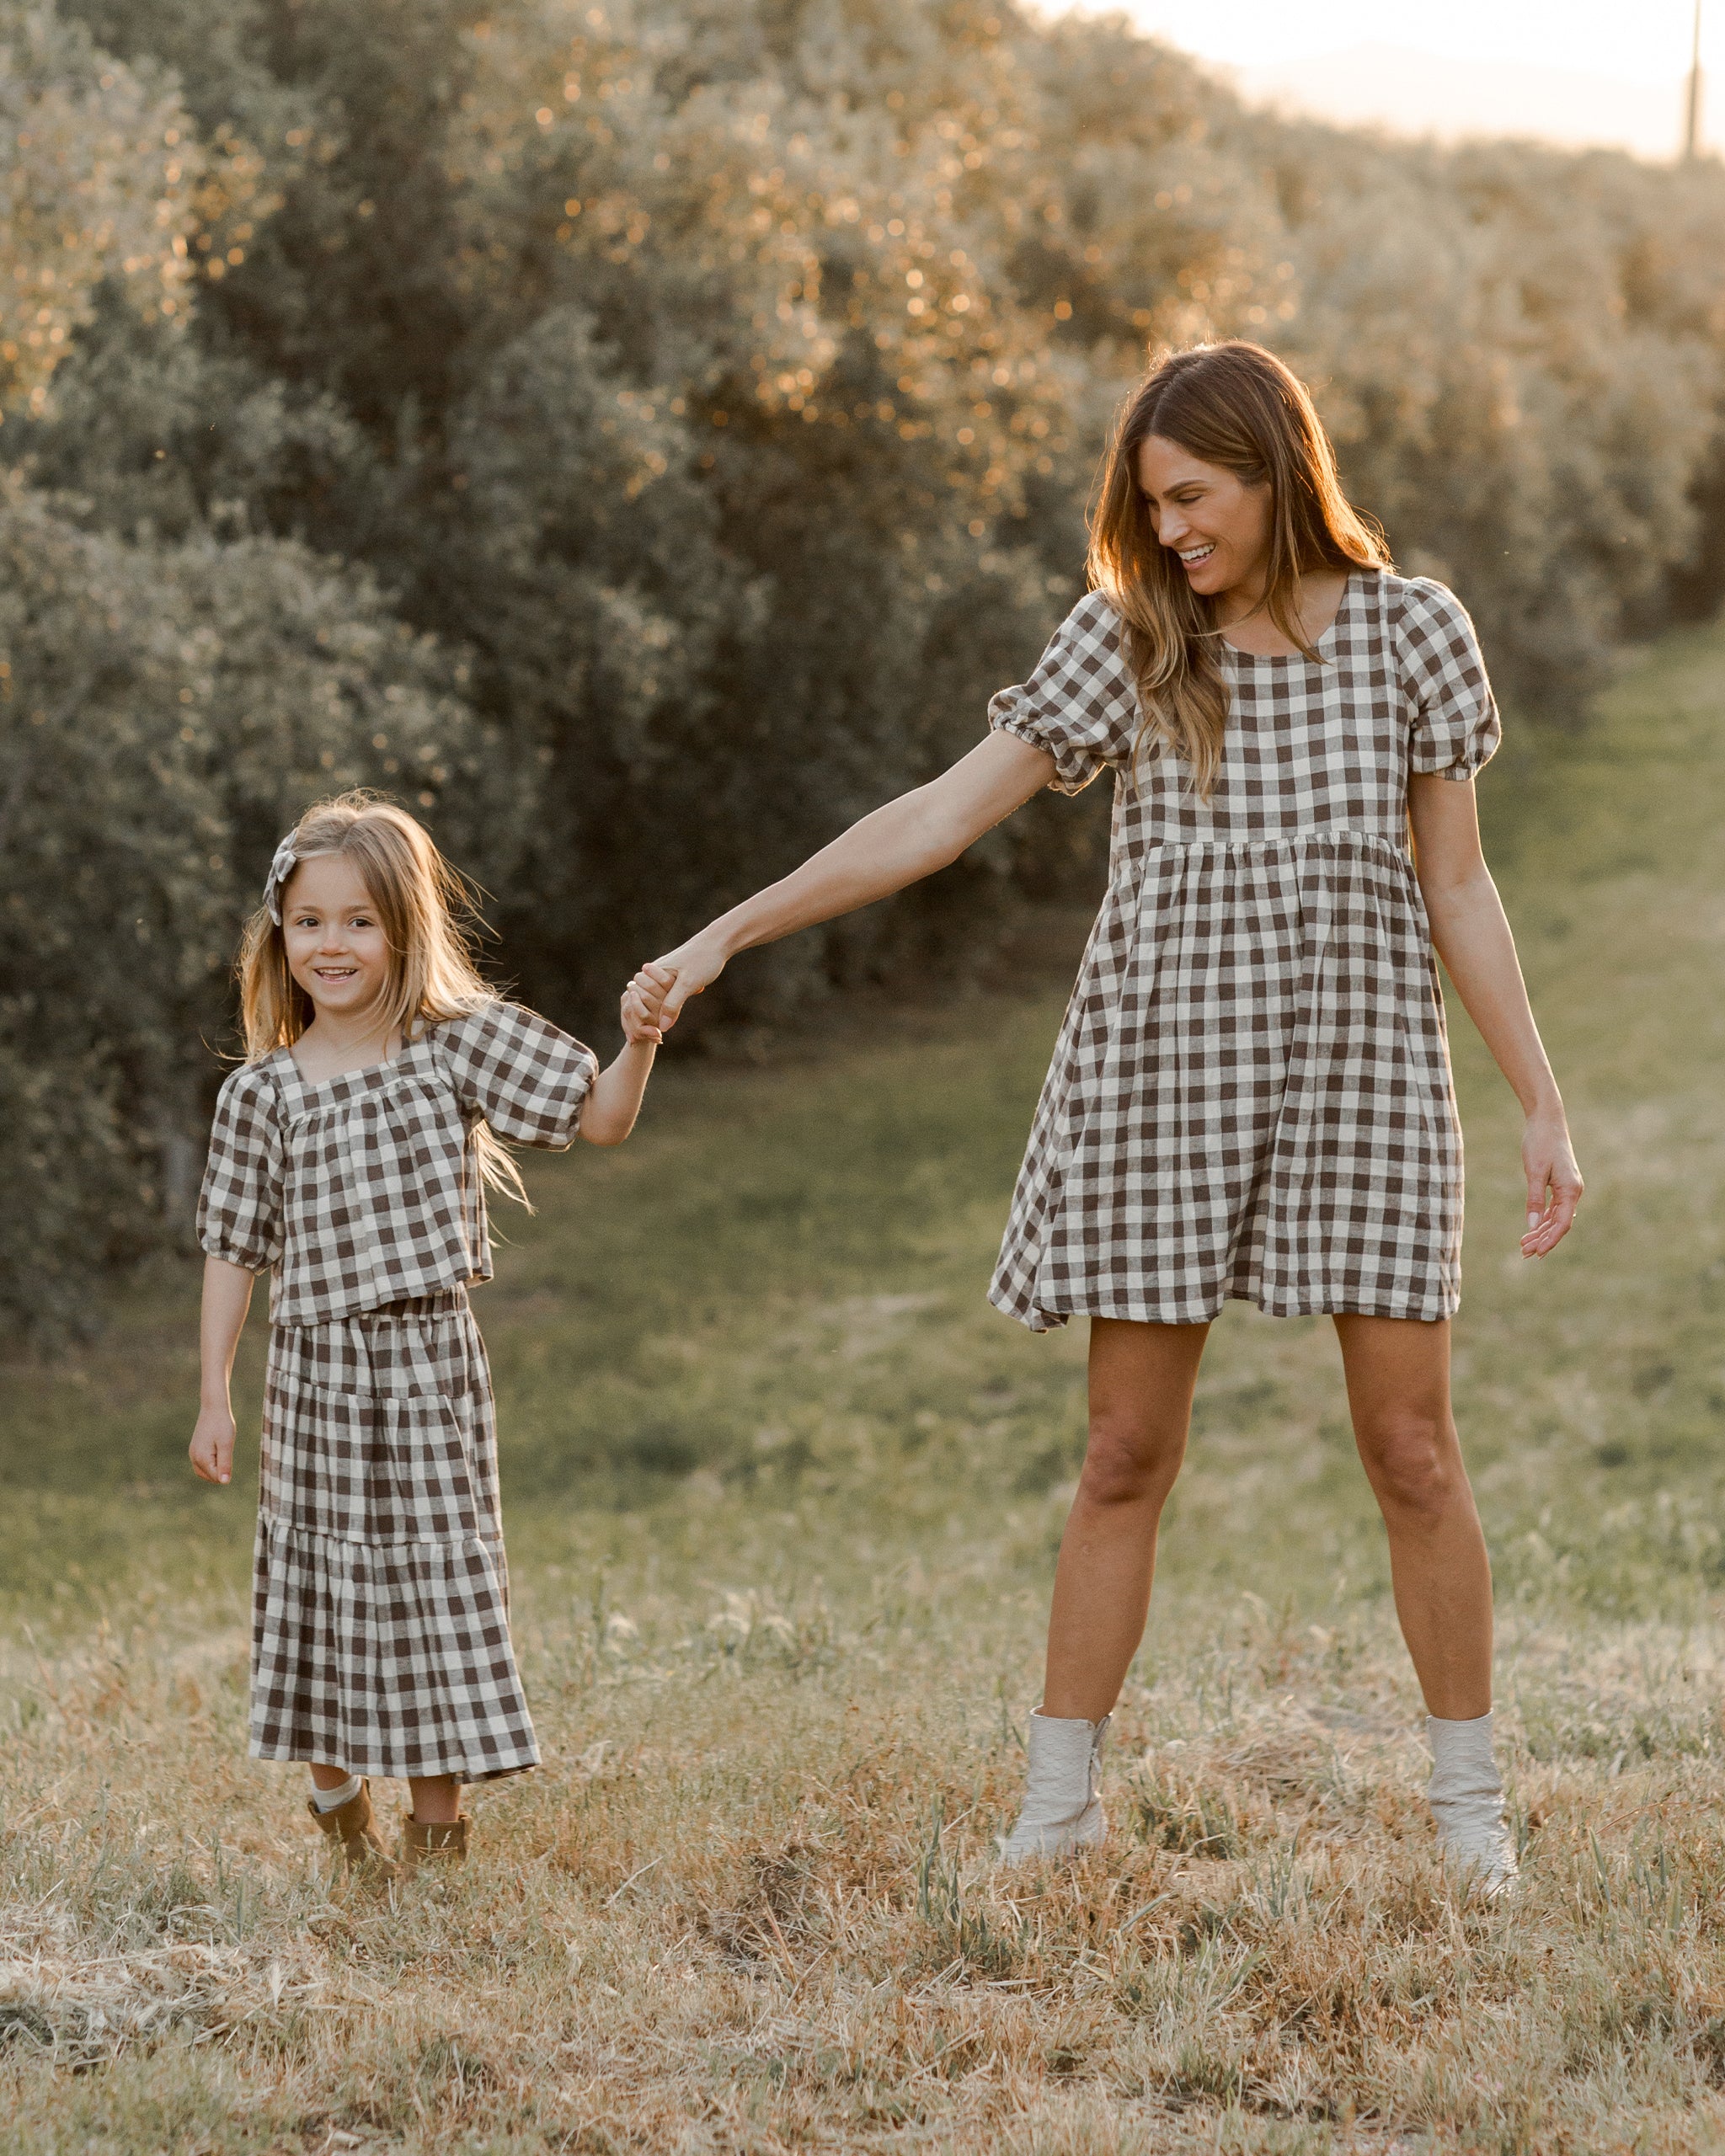 Marley Dress | Charcoal Check - Rylee + Cru | Kids Clothes | Trendy Baby Clothes | Modern Infant Outfits |